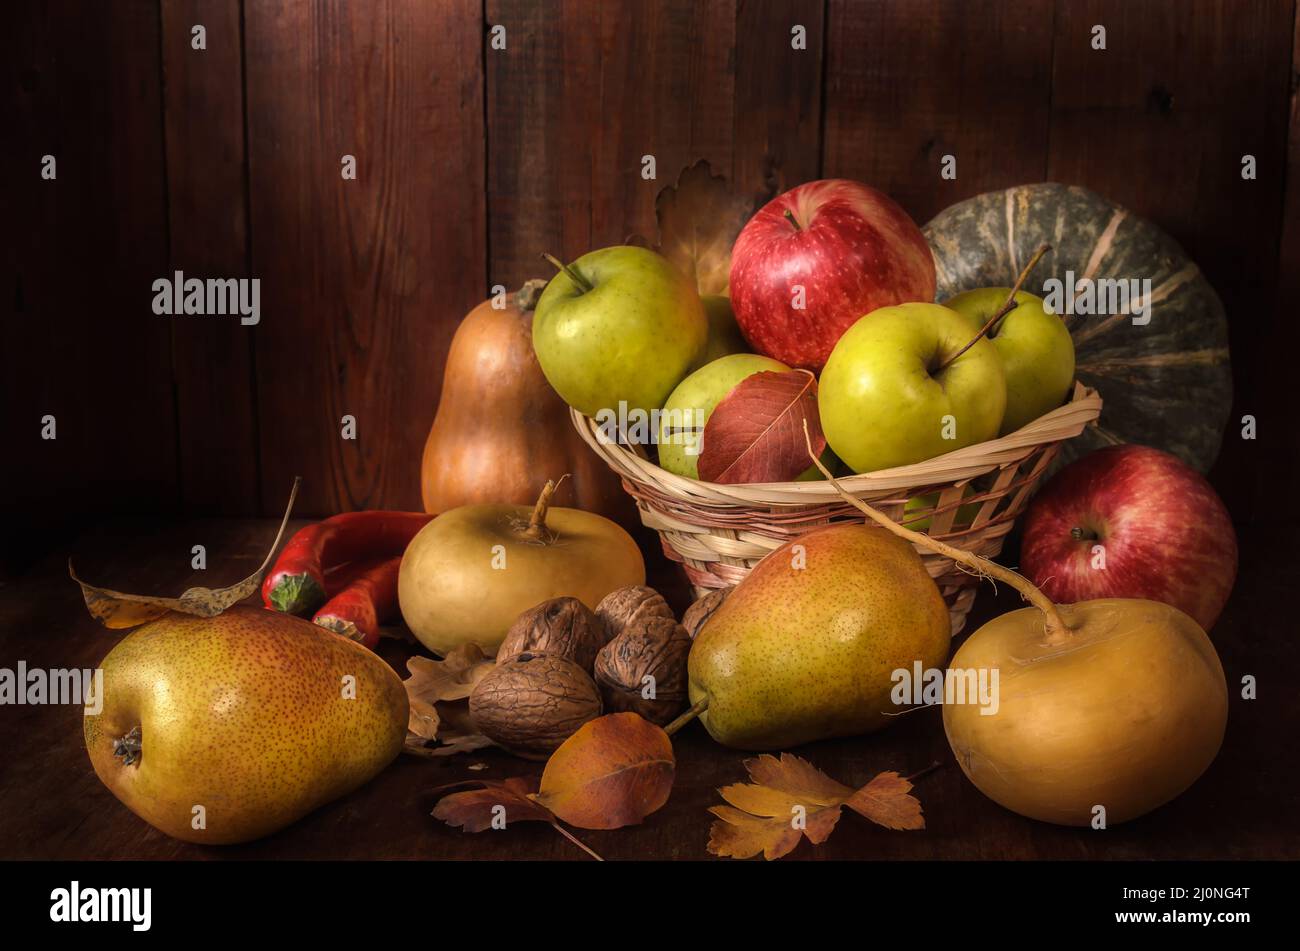 Fruits and vegetables on a dark wooden background in a rustic style Stock Photo